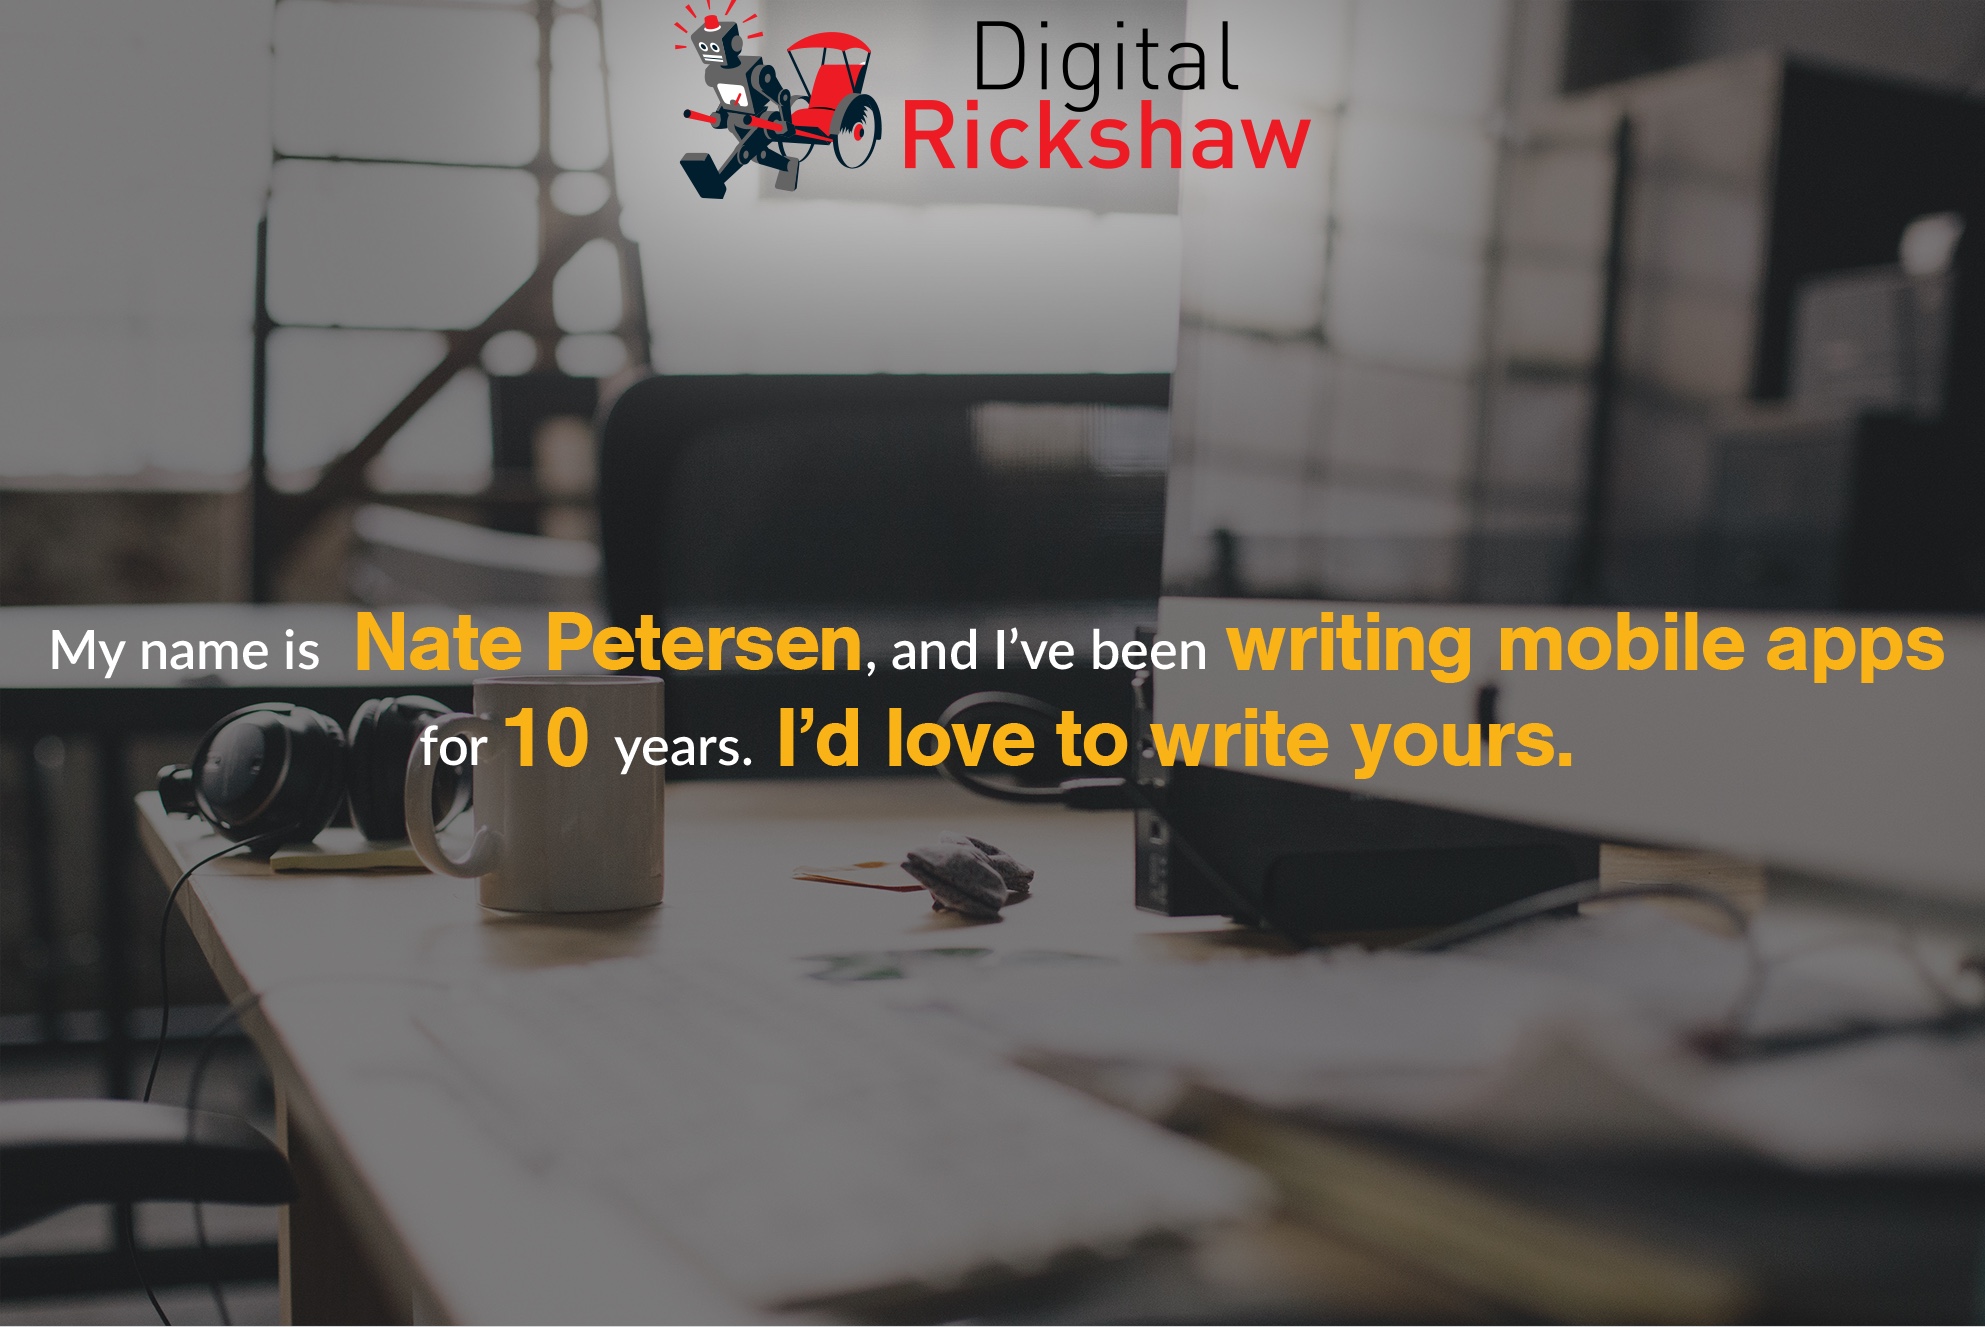 My name is Nate Petersen, and I've been writing mobile apps for 10 years. I'd love to write yours.